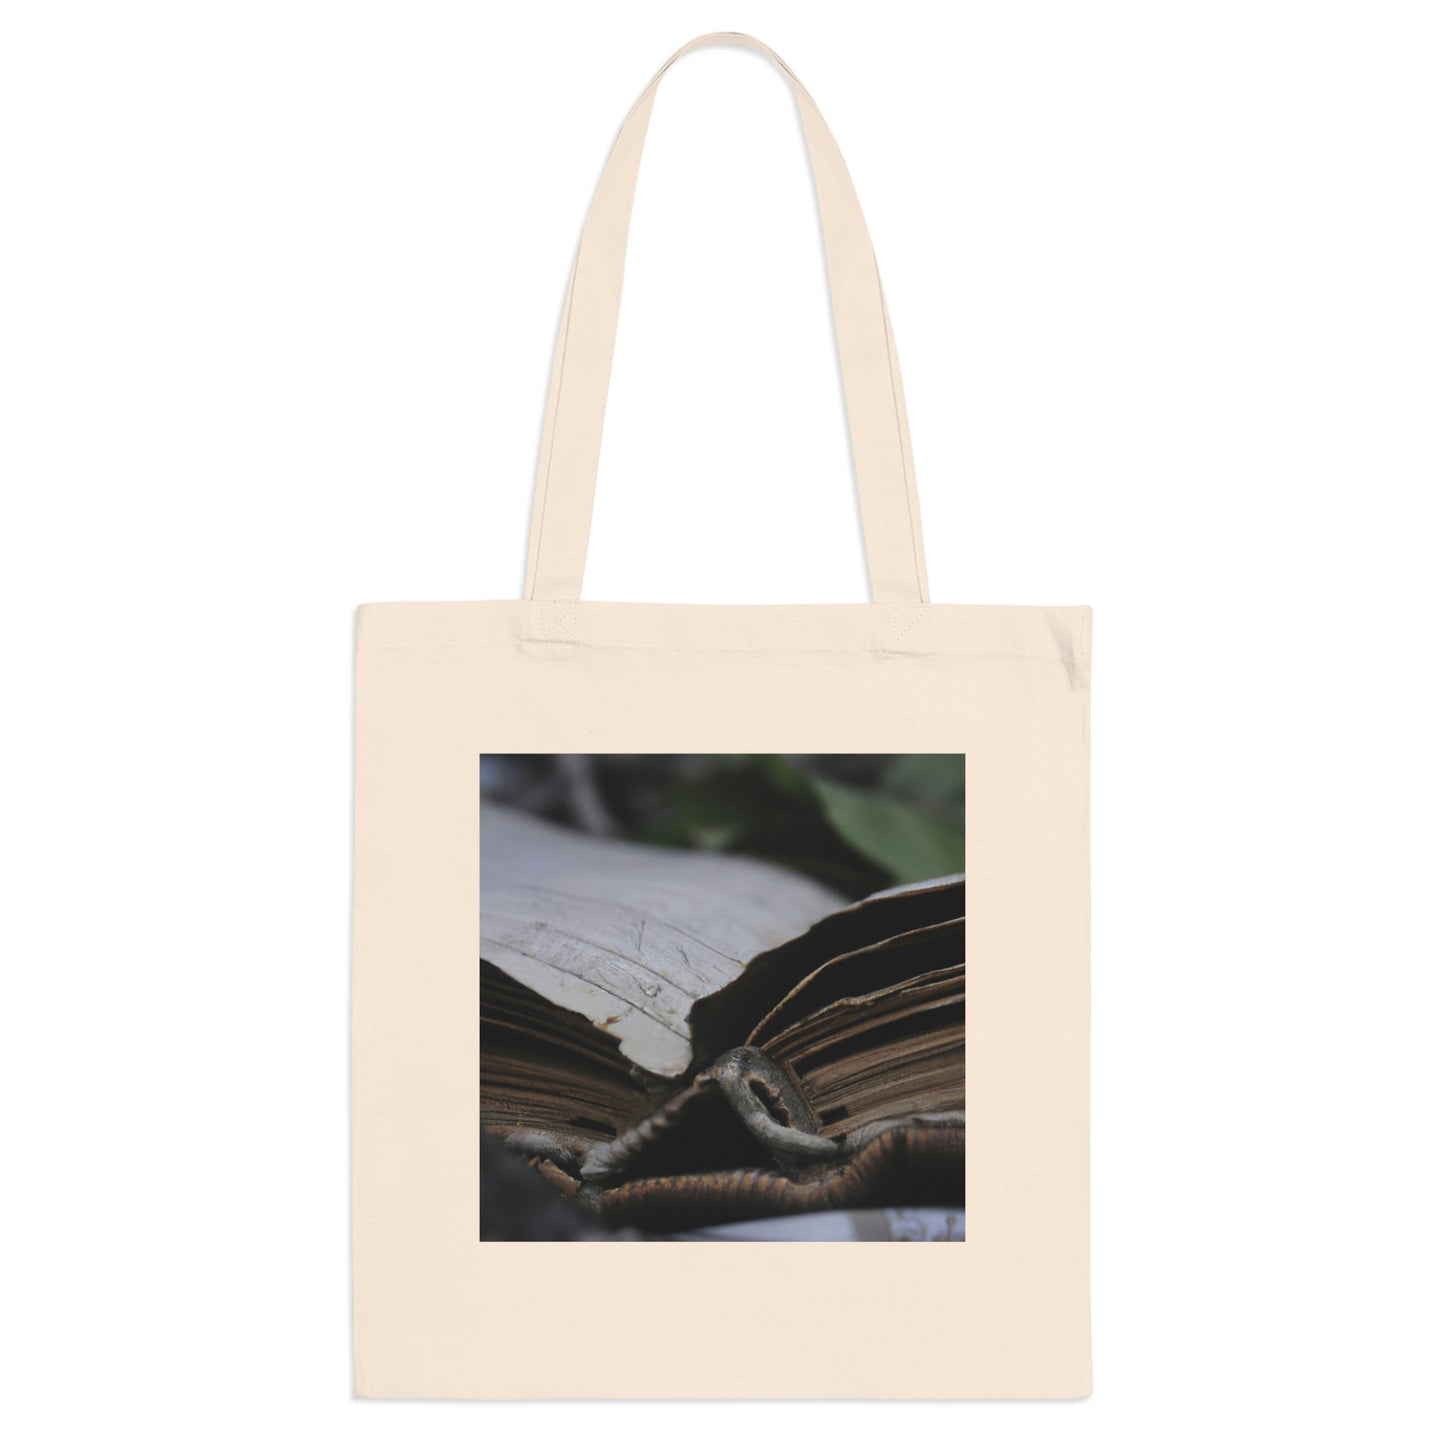 Unbeknownst to its readers, the book possesses magical powers.

"The Forgotten Tome of Magic" - The Alien Tote Bag